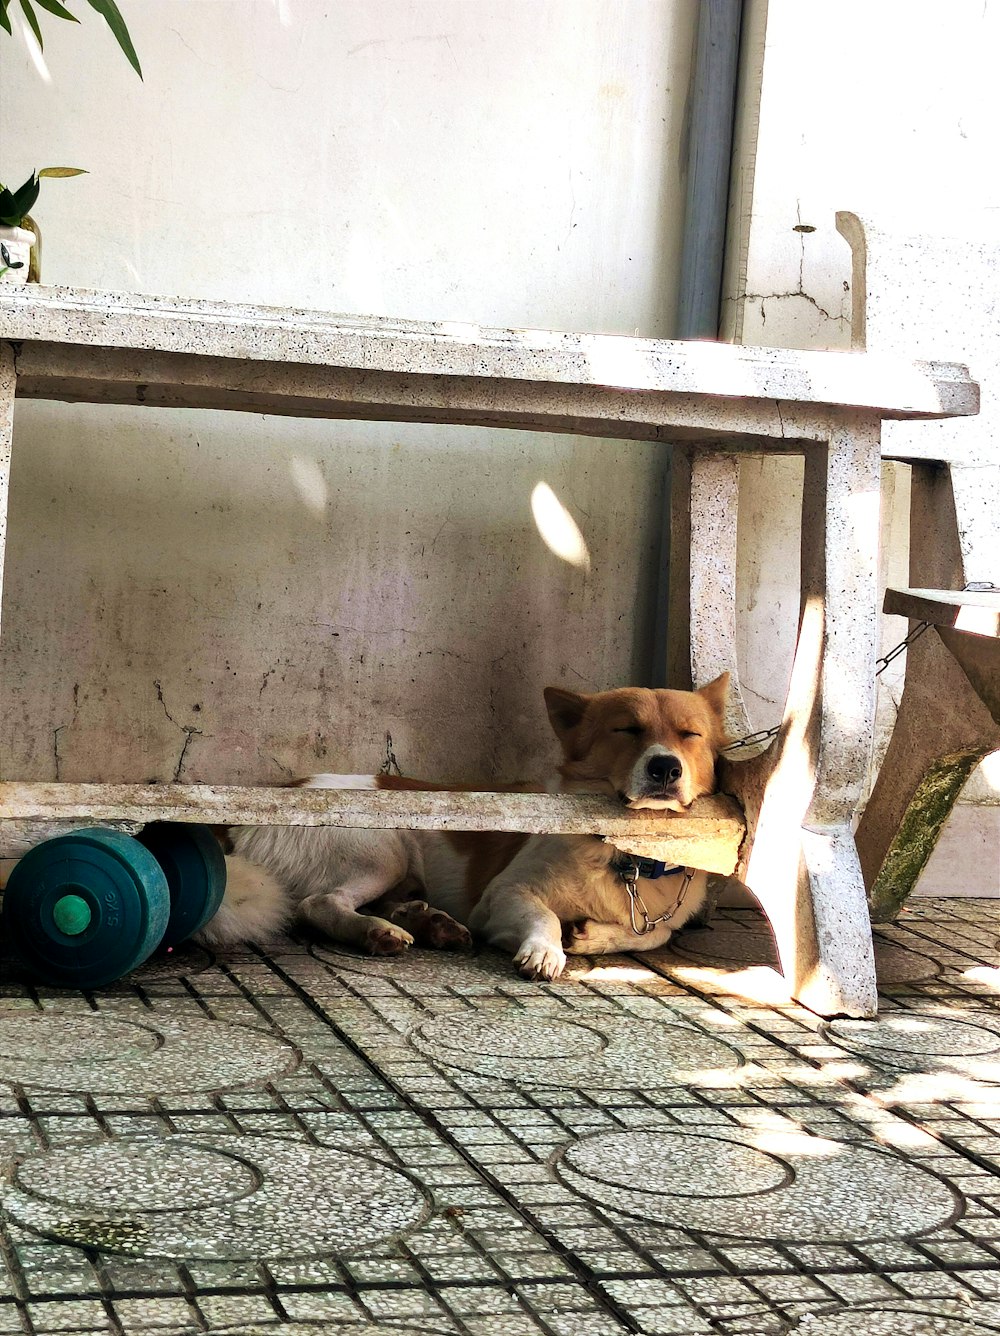 a dog sitting under a wooden bench on a tiled floor